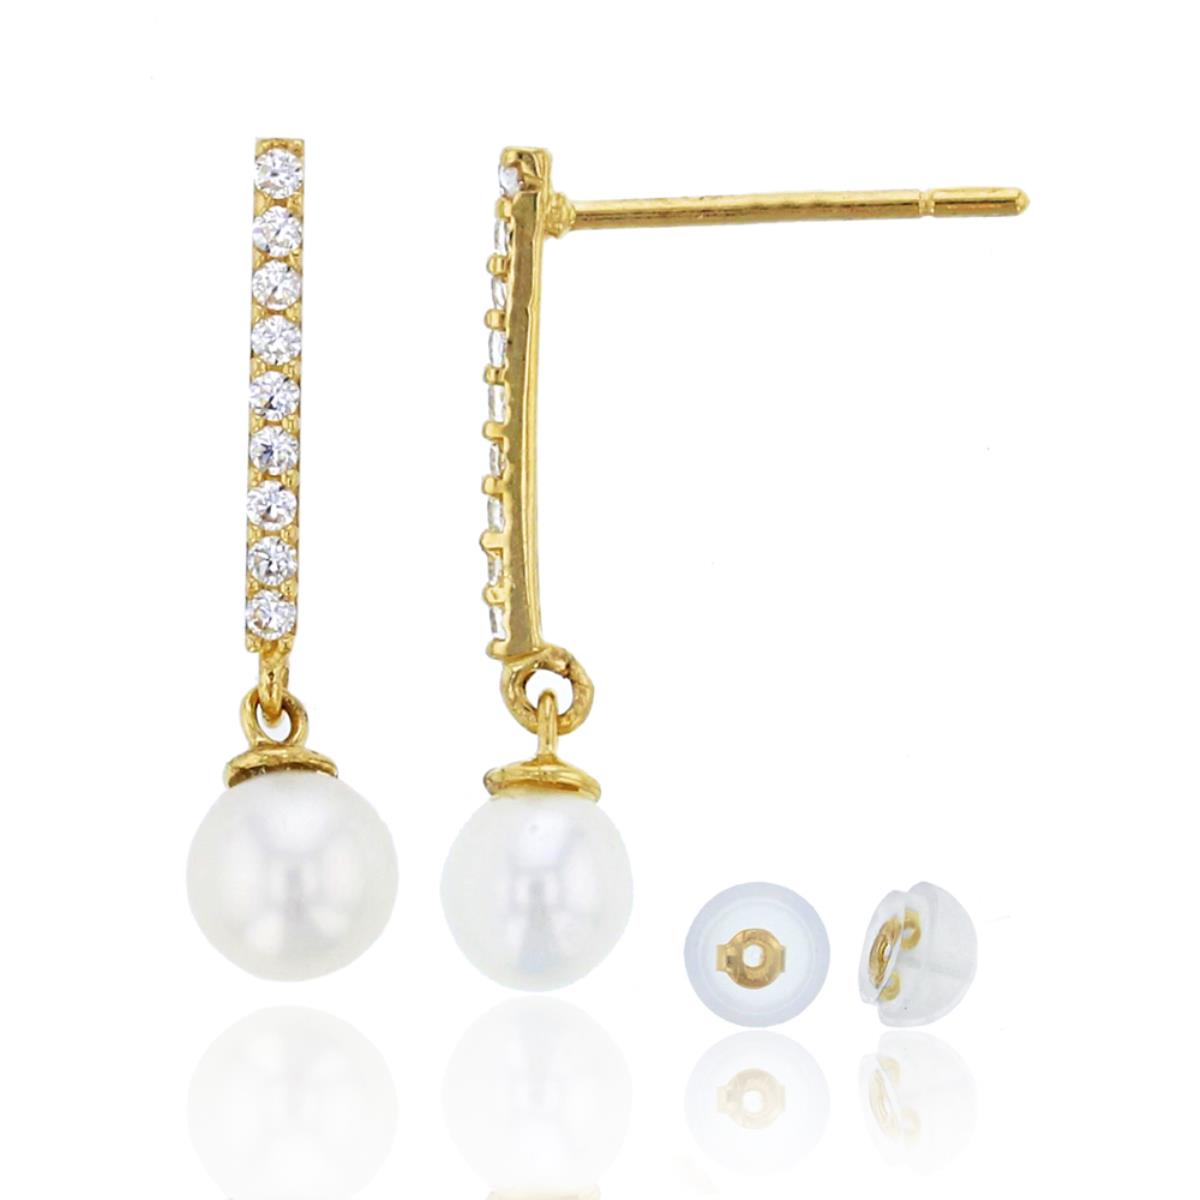 10K Yellow Gold Pave Dangling 4mm Fresh Water Pearl Drop Earring & 10K Silicone Back